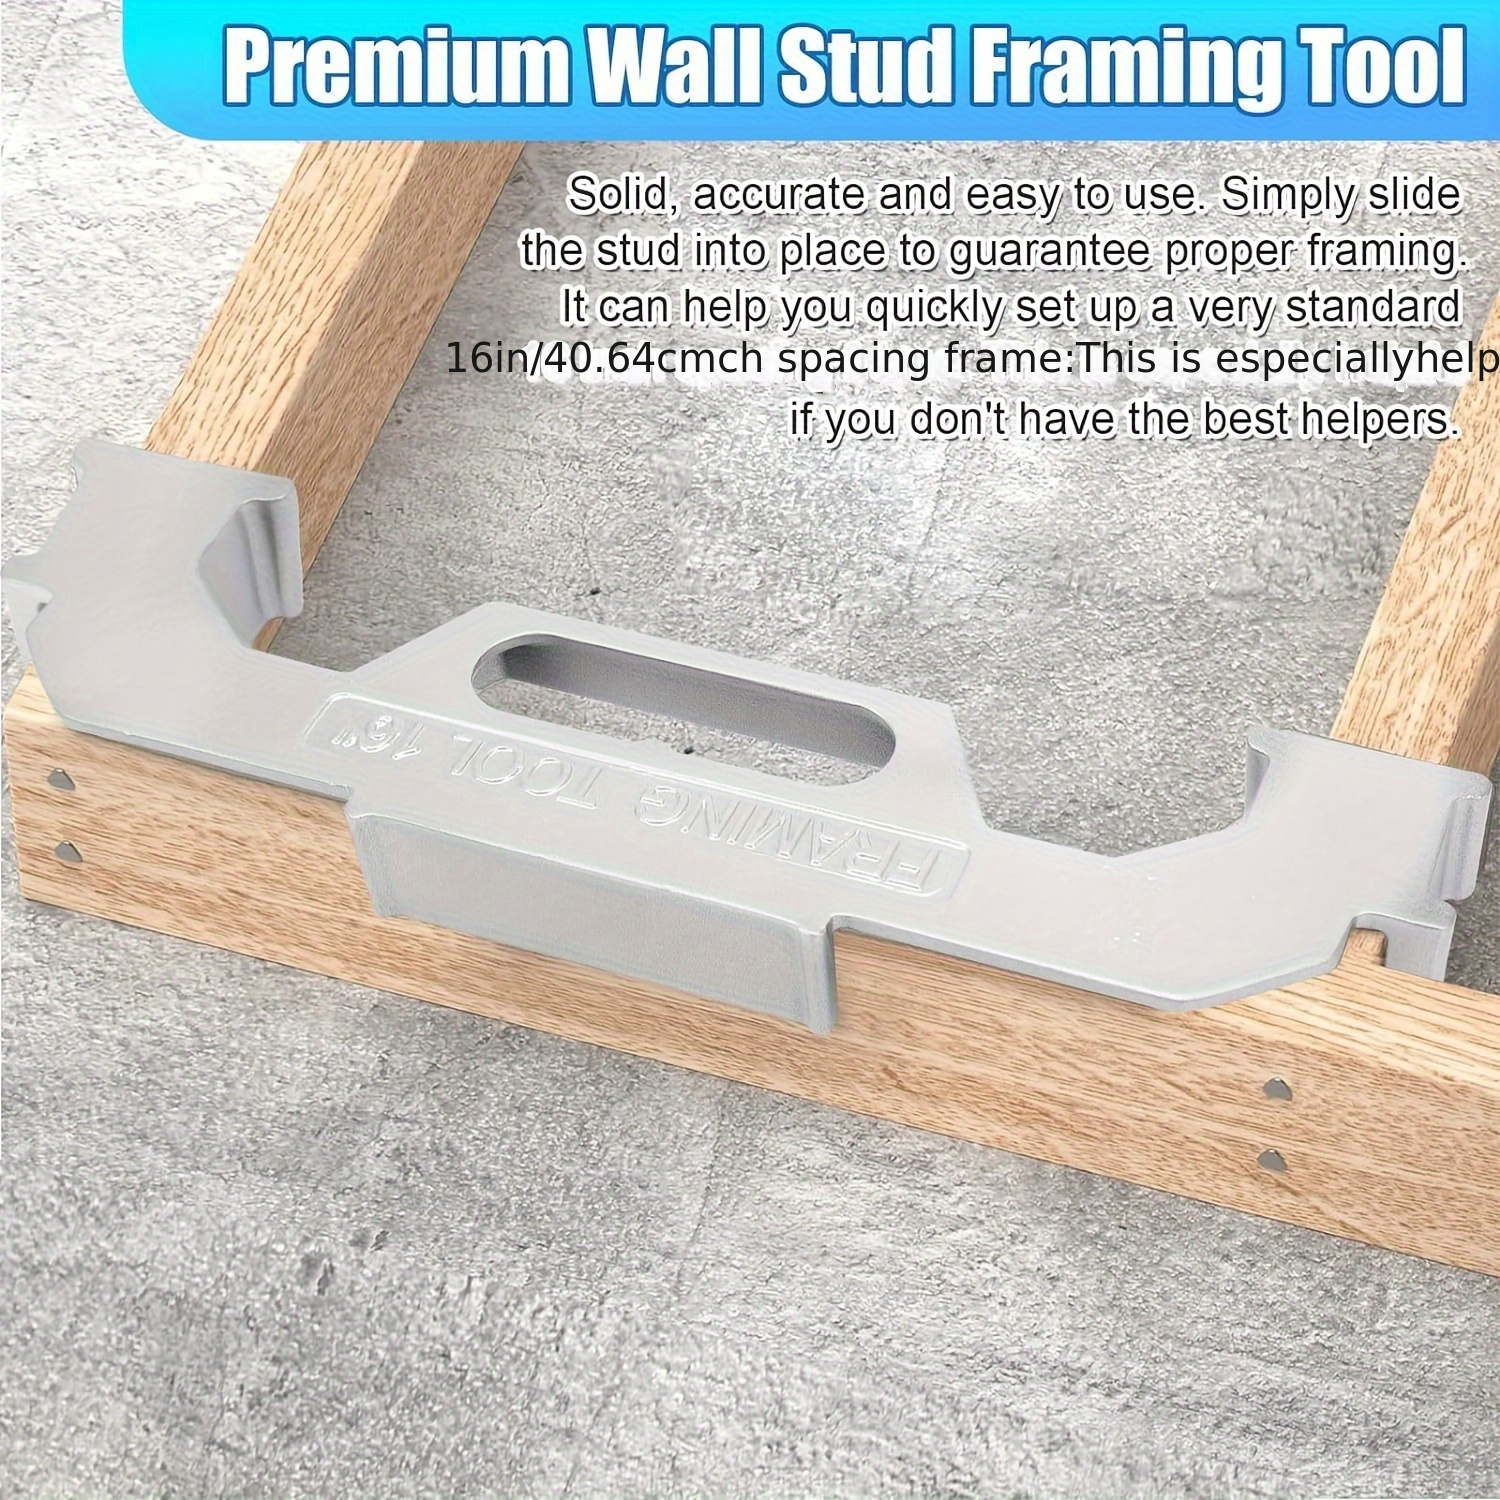 2Pcs Framing Tools- Framing Tools, Stud Framing Jig For 16 Inch On